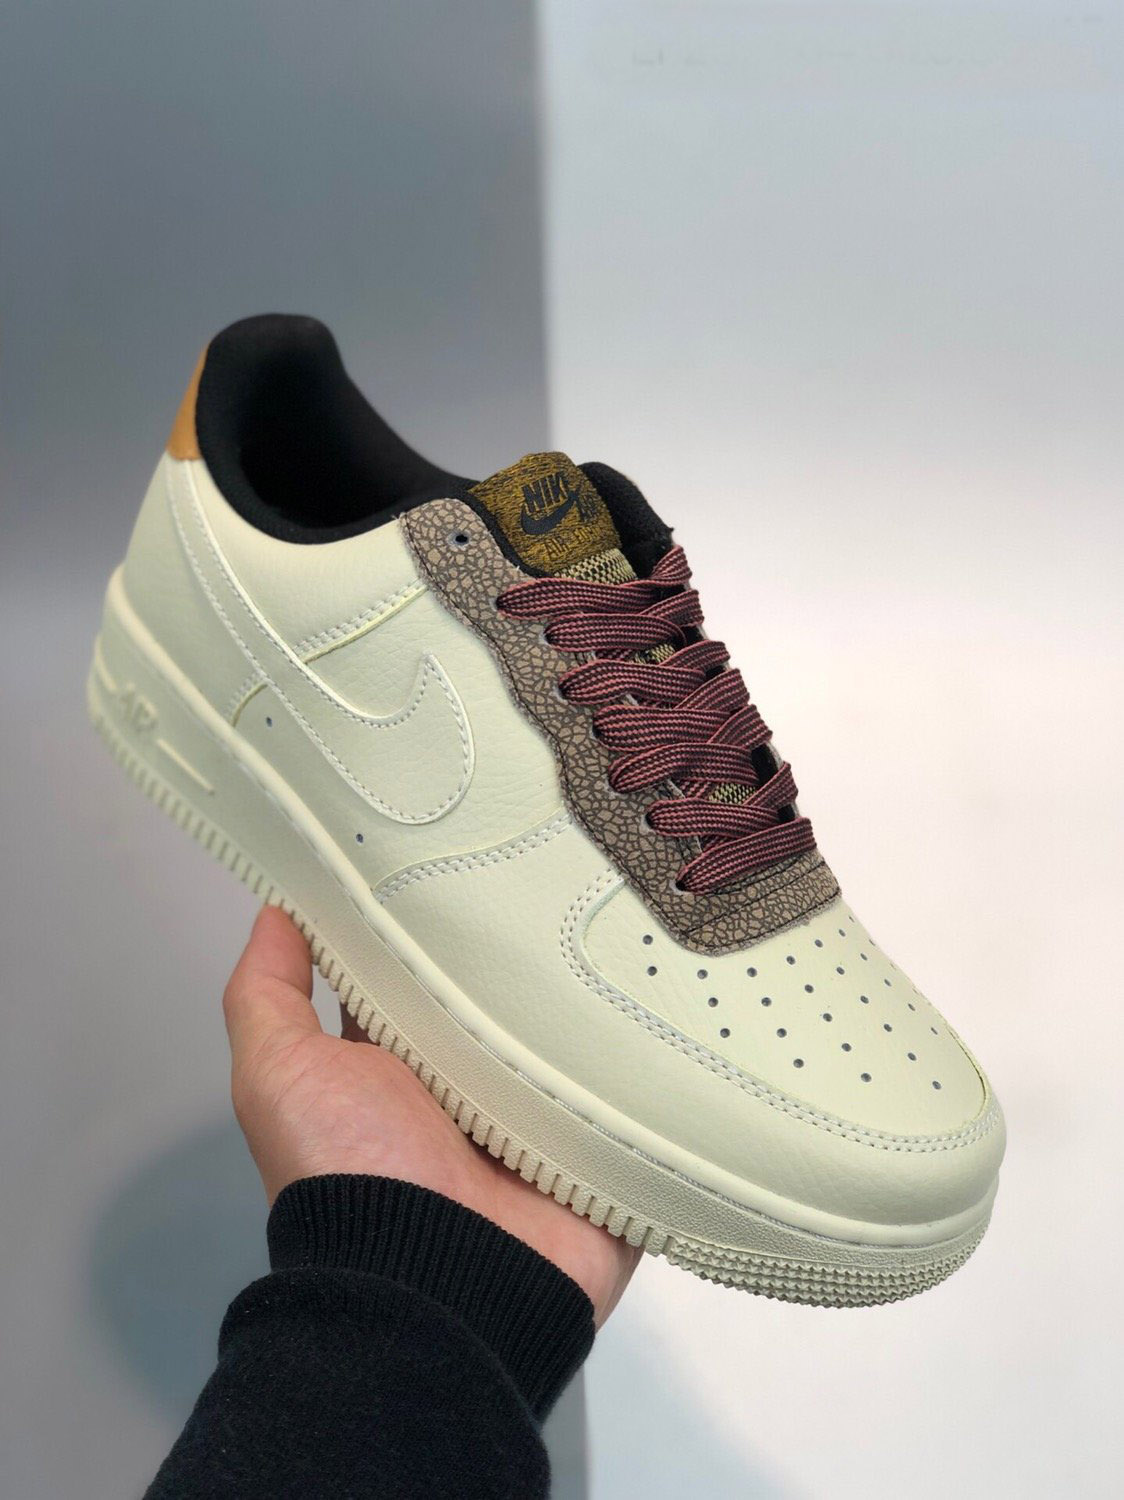 Nike Air Force 1 Low Fossil/Wheat-Shimmer CK4363-200 For Sale – Sneaker ...